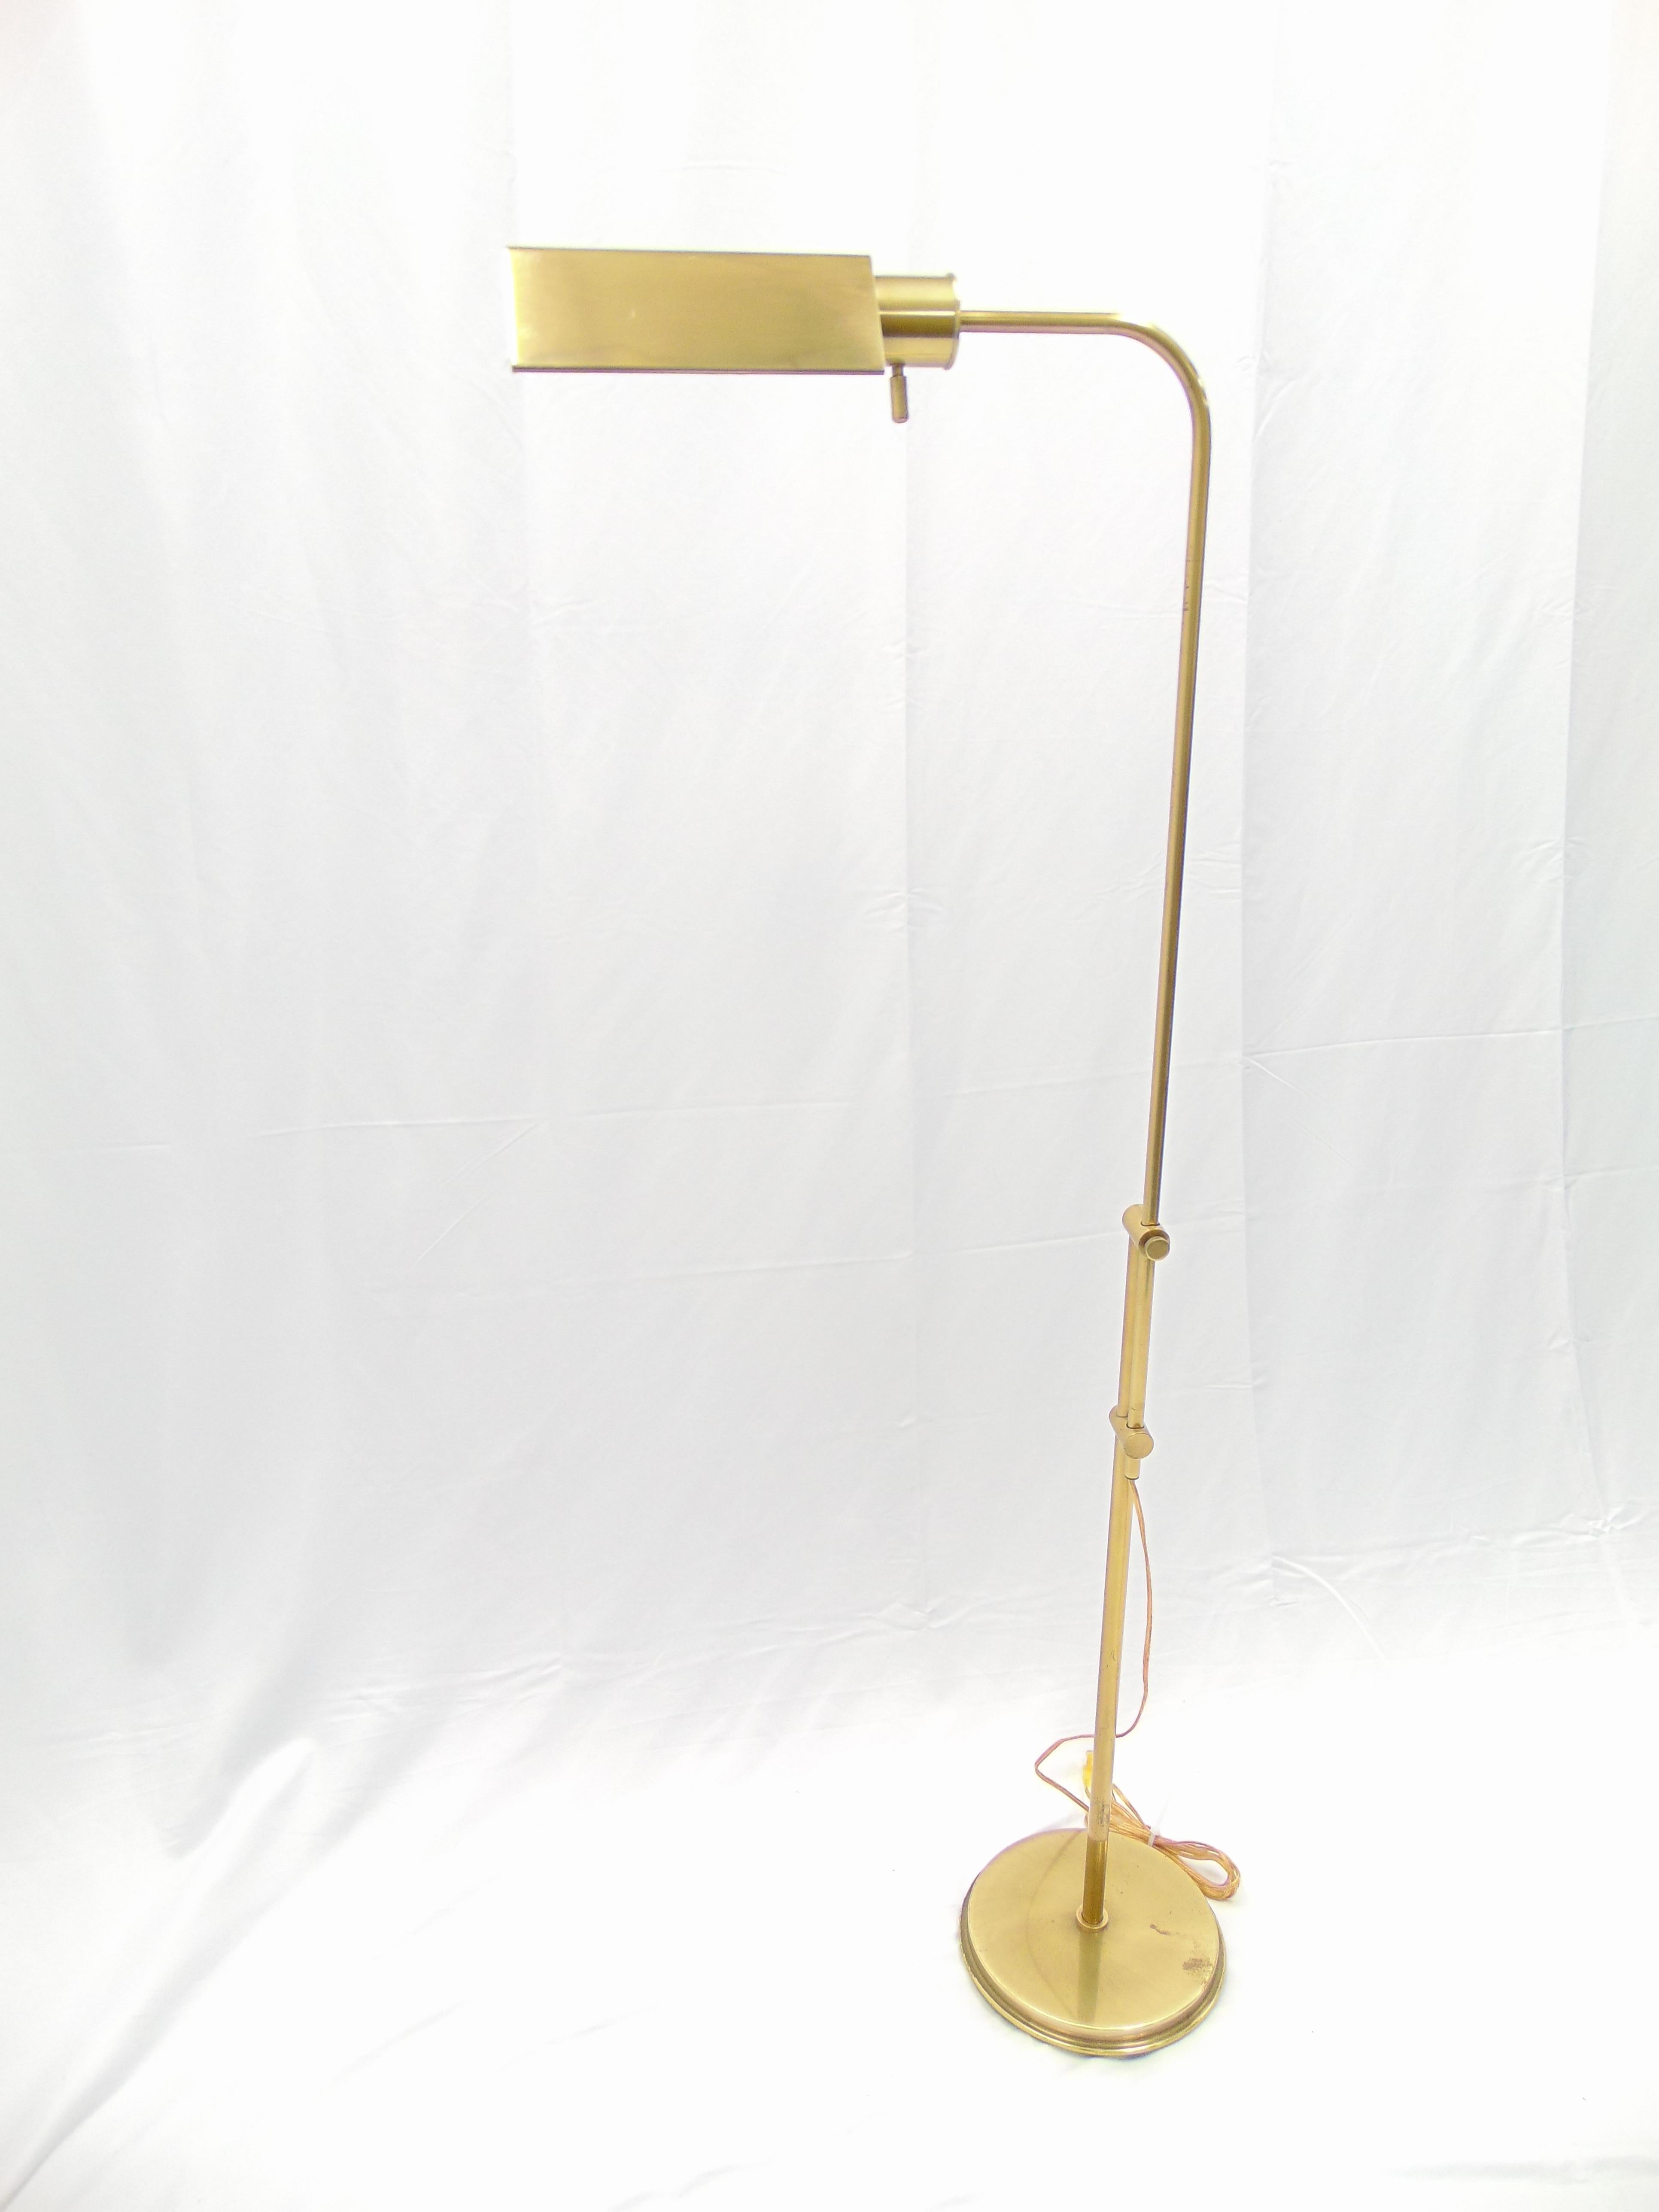 This is a beautiful vintage Frederick Cooper adjustable brass floor lamp. The lowest height it can be set at is: 36.5” and the highest is: 56.5”. The diameter of the base is 9.75.” The width across of the lamp is 19”.